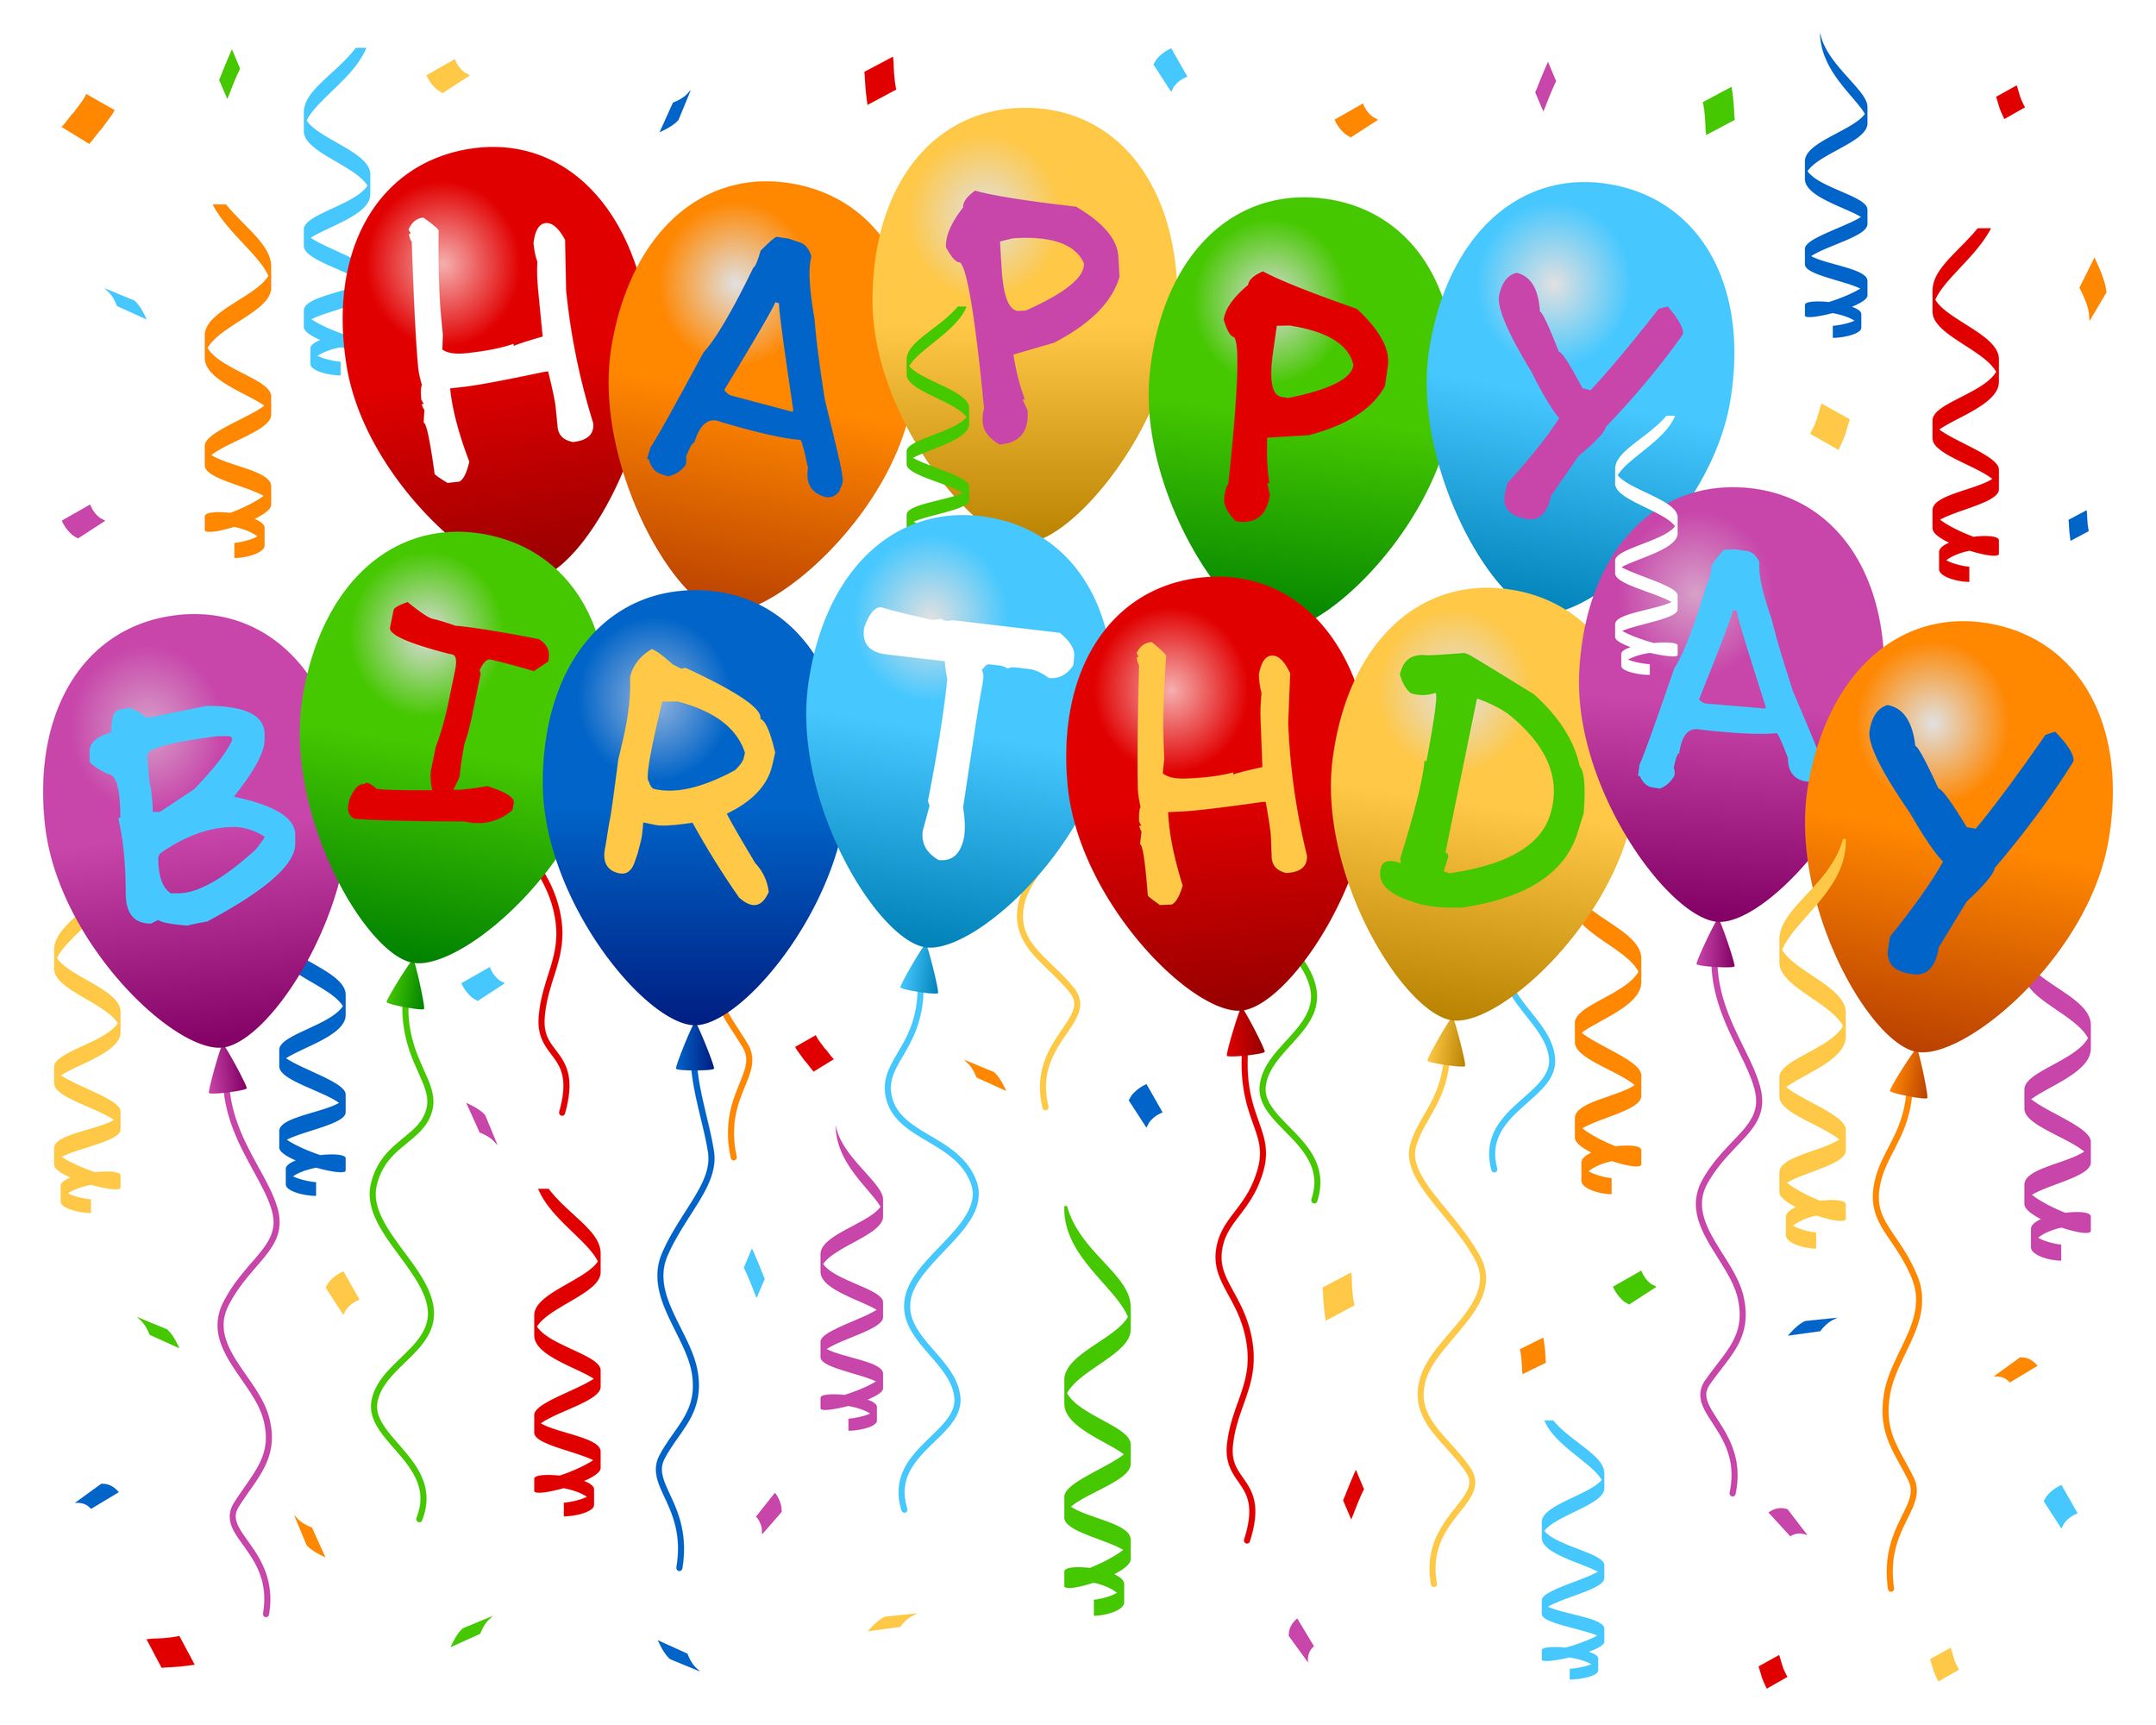 happy birthday banner Large Image. Happy birthday greetings, Happy birthday balloon banner, Happy birthday banners